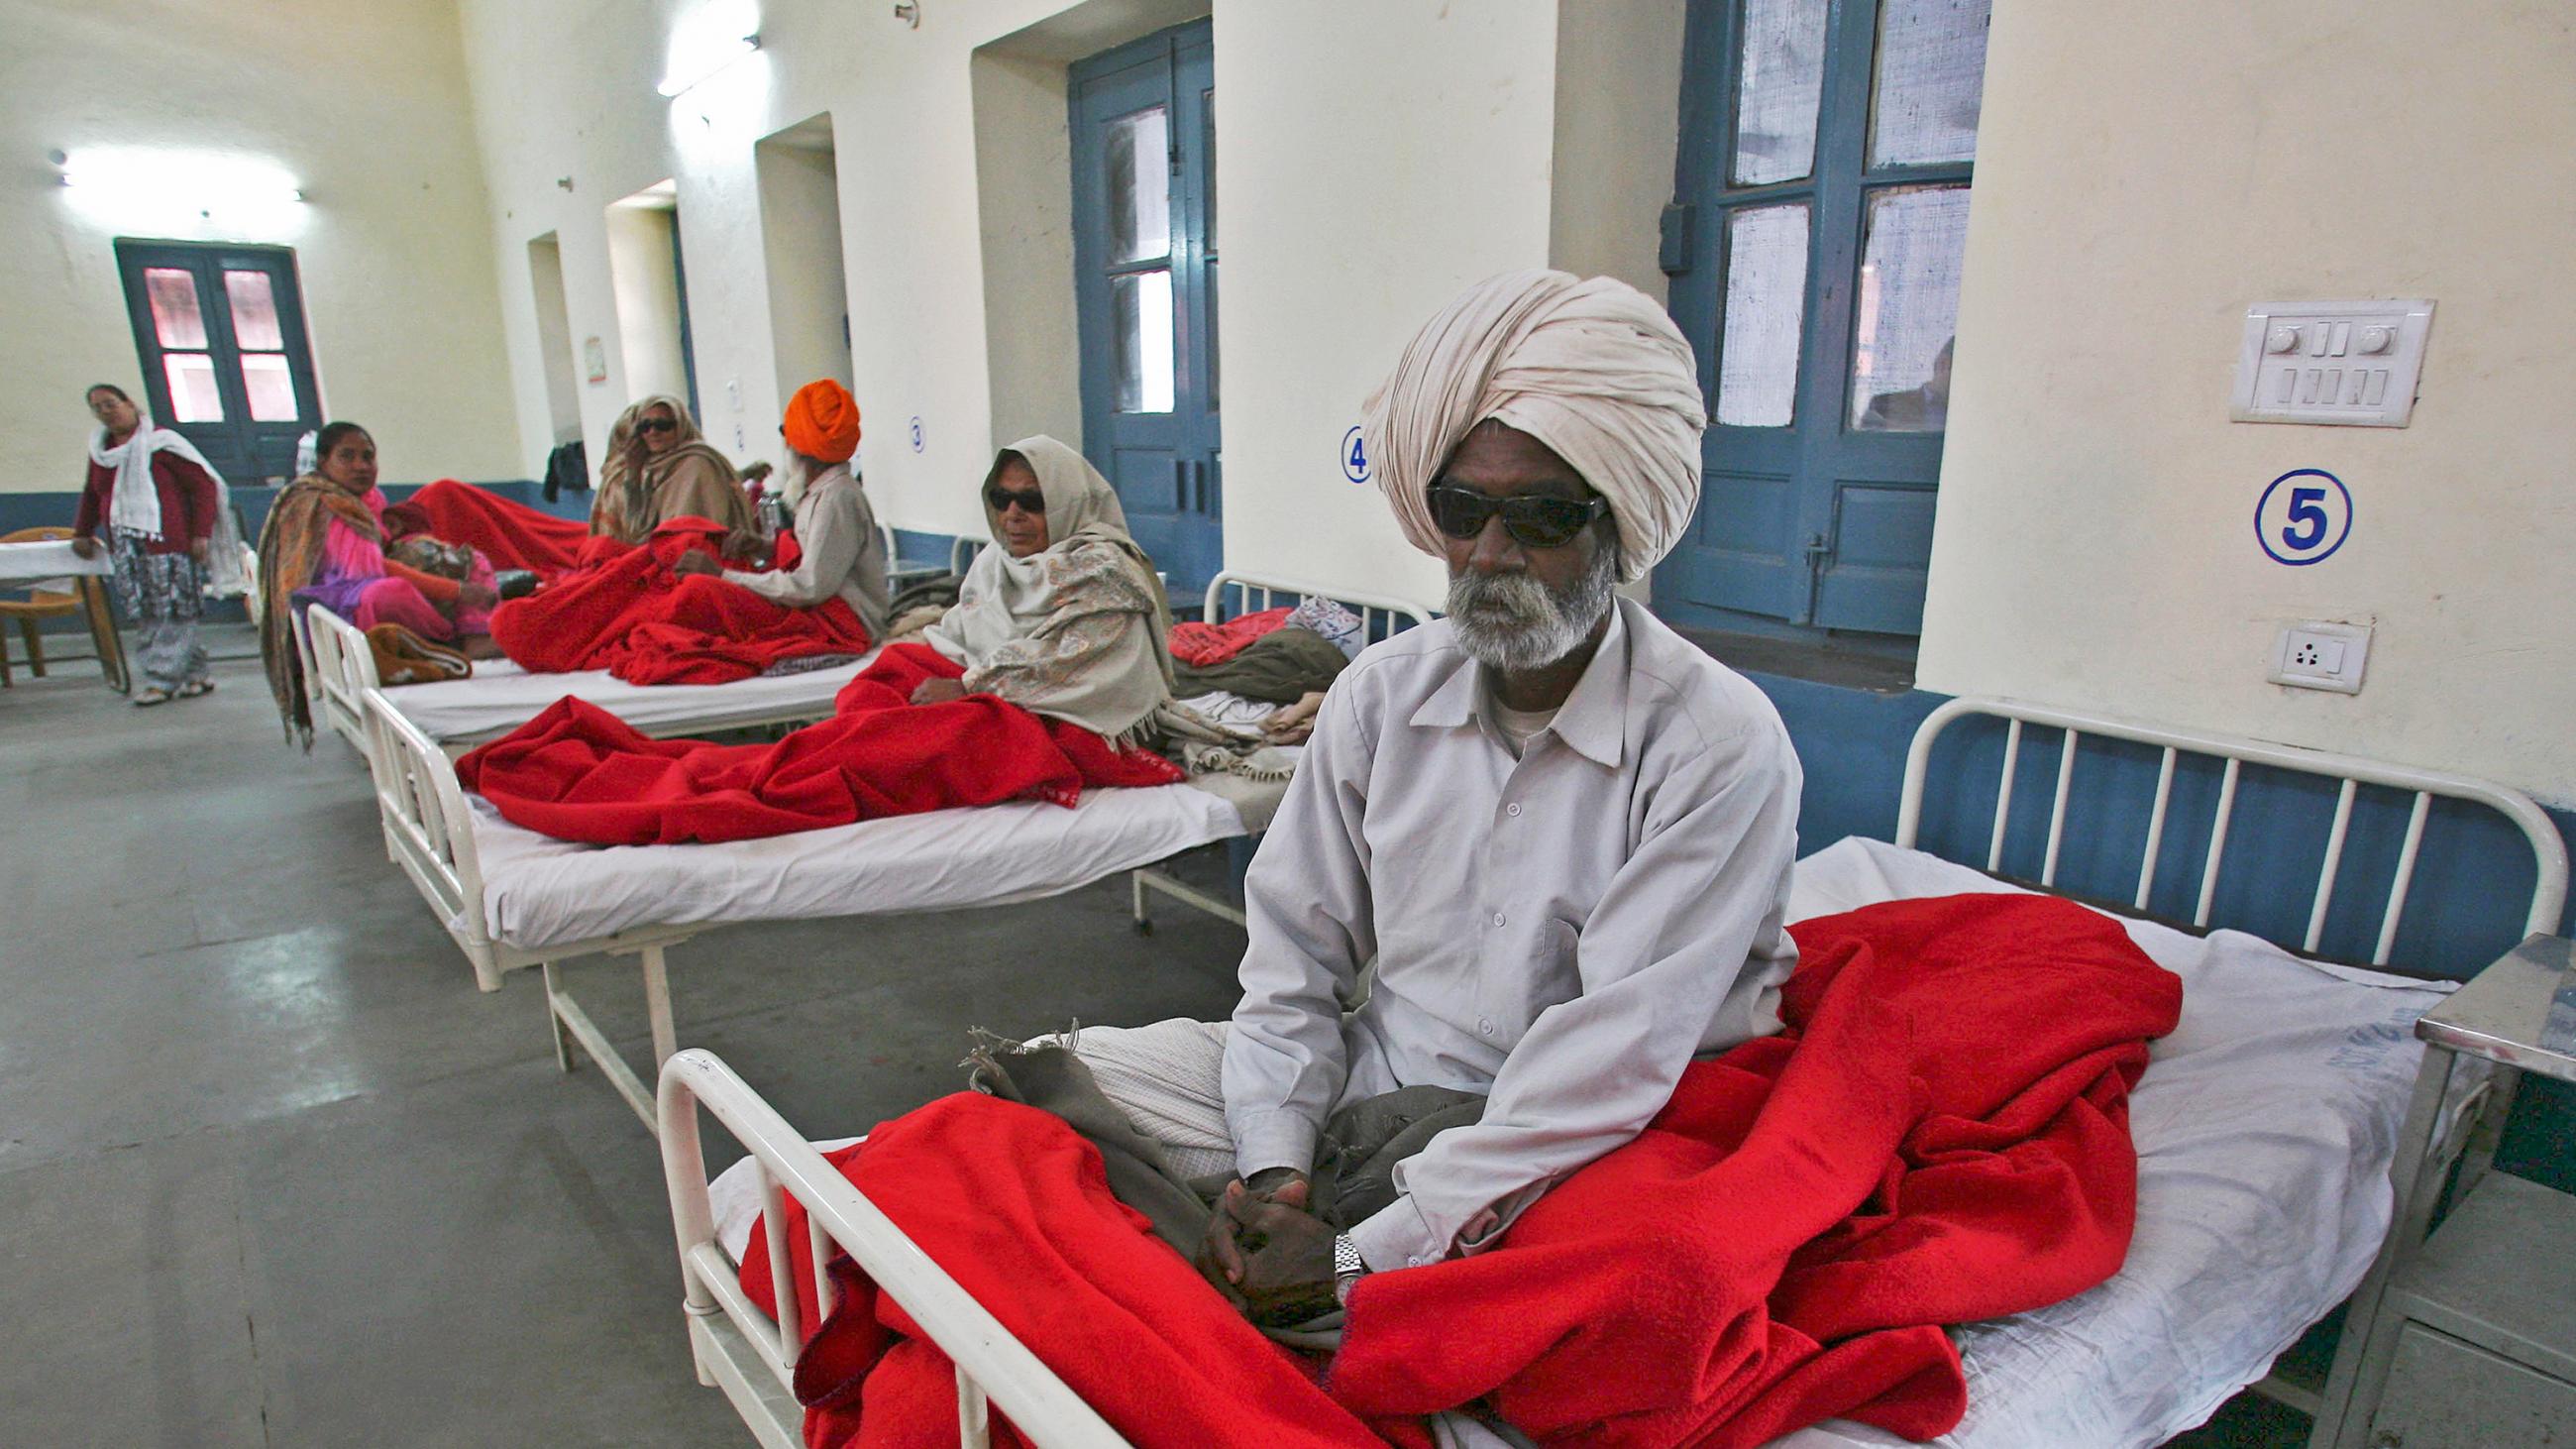 The photo shows several people sitting on hospital beds. One man in the foreground is wearing dark glasses. 